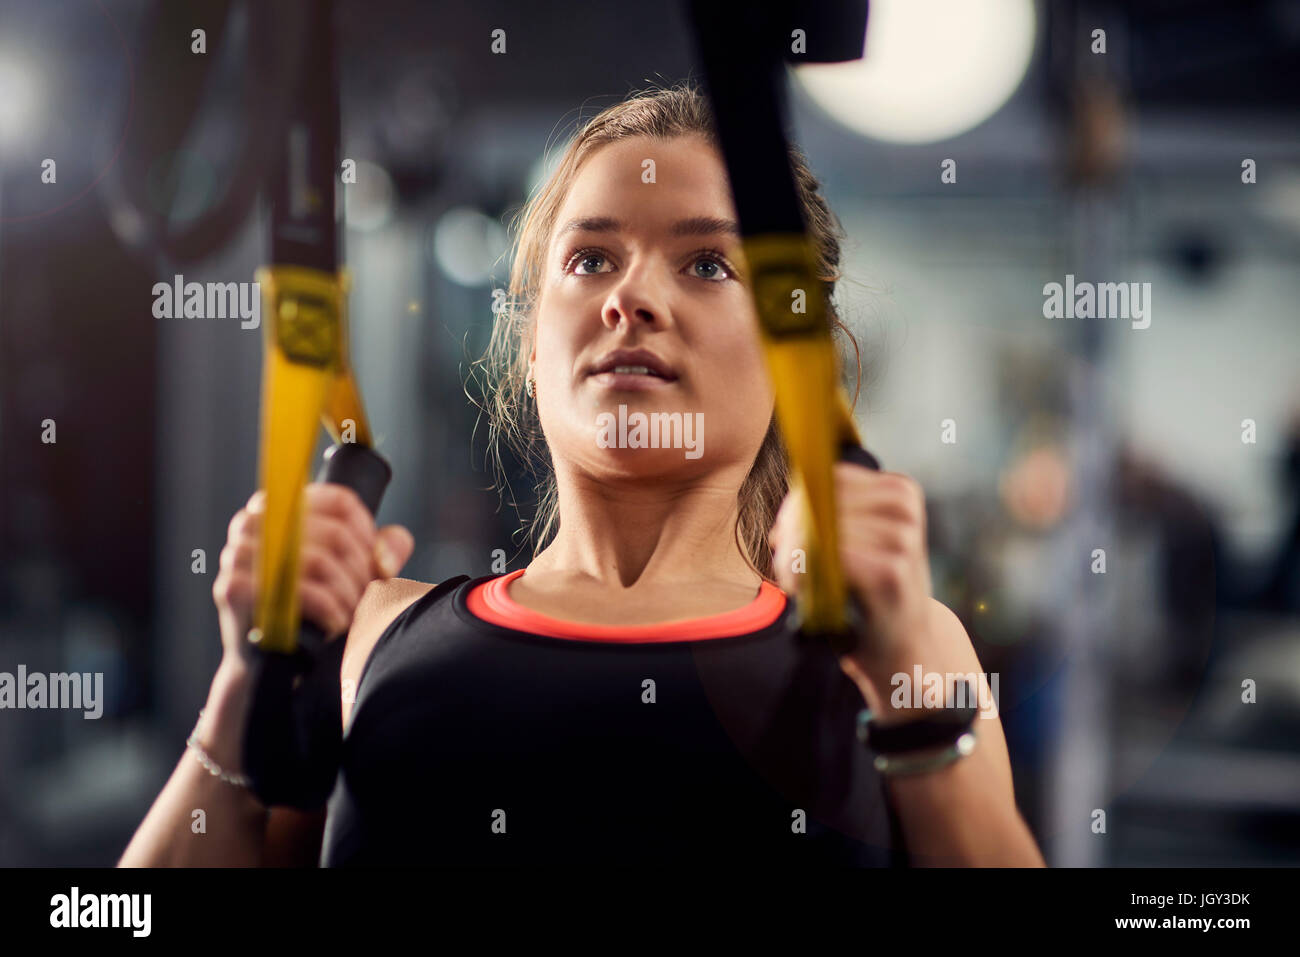 Young woman doing pull ups on exercise handles in gym Stock Photo